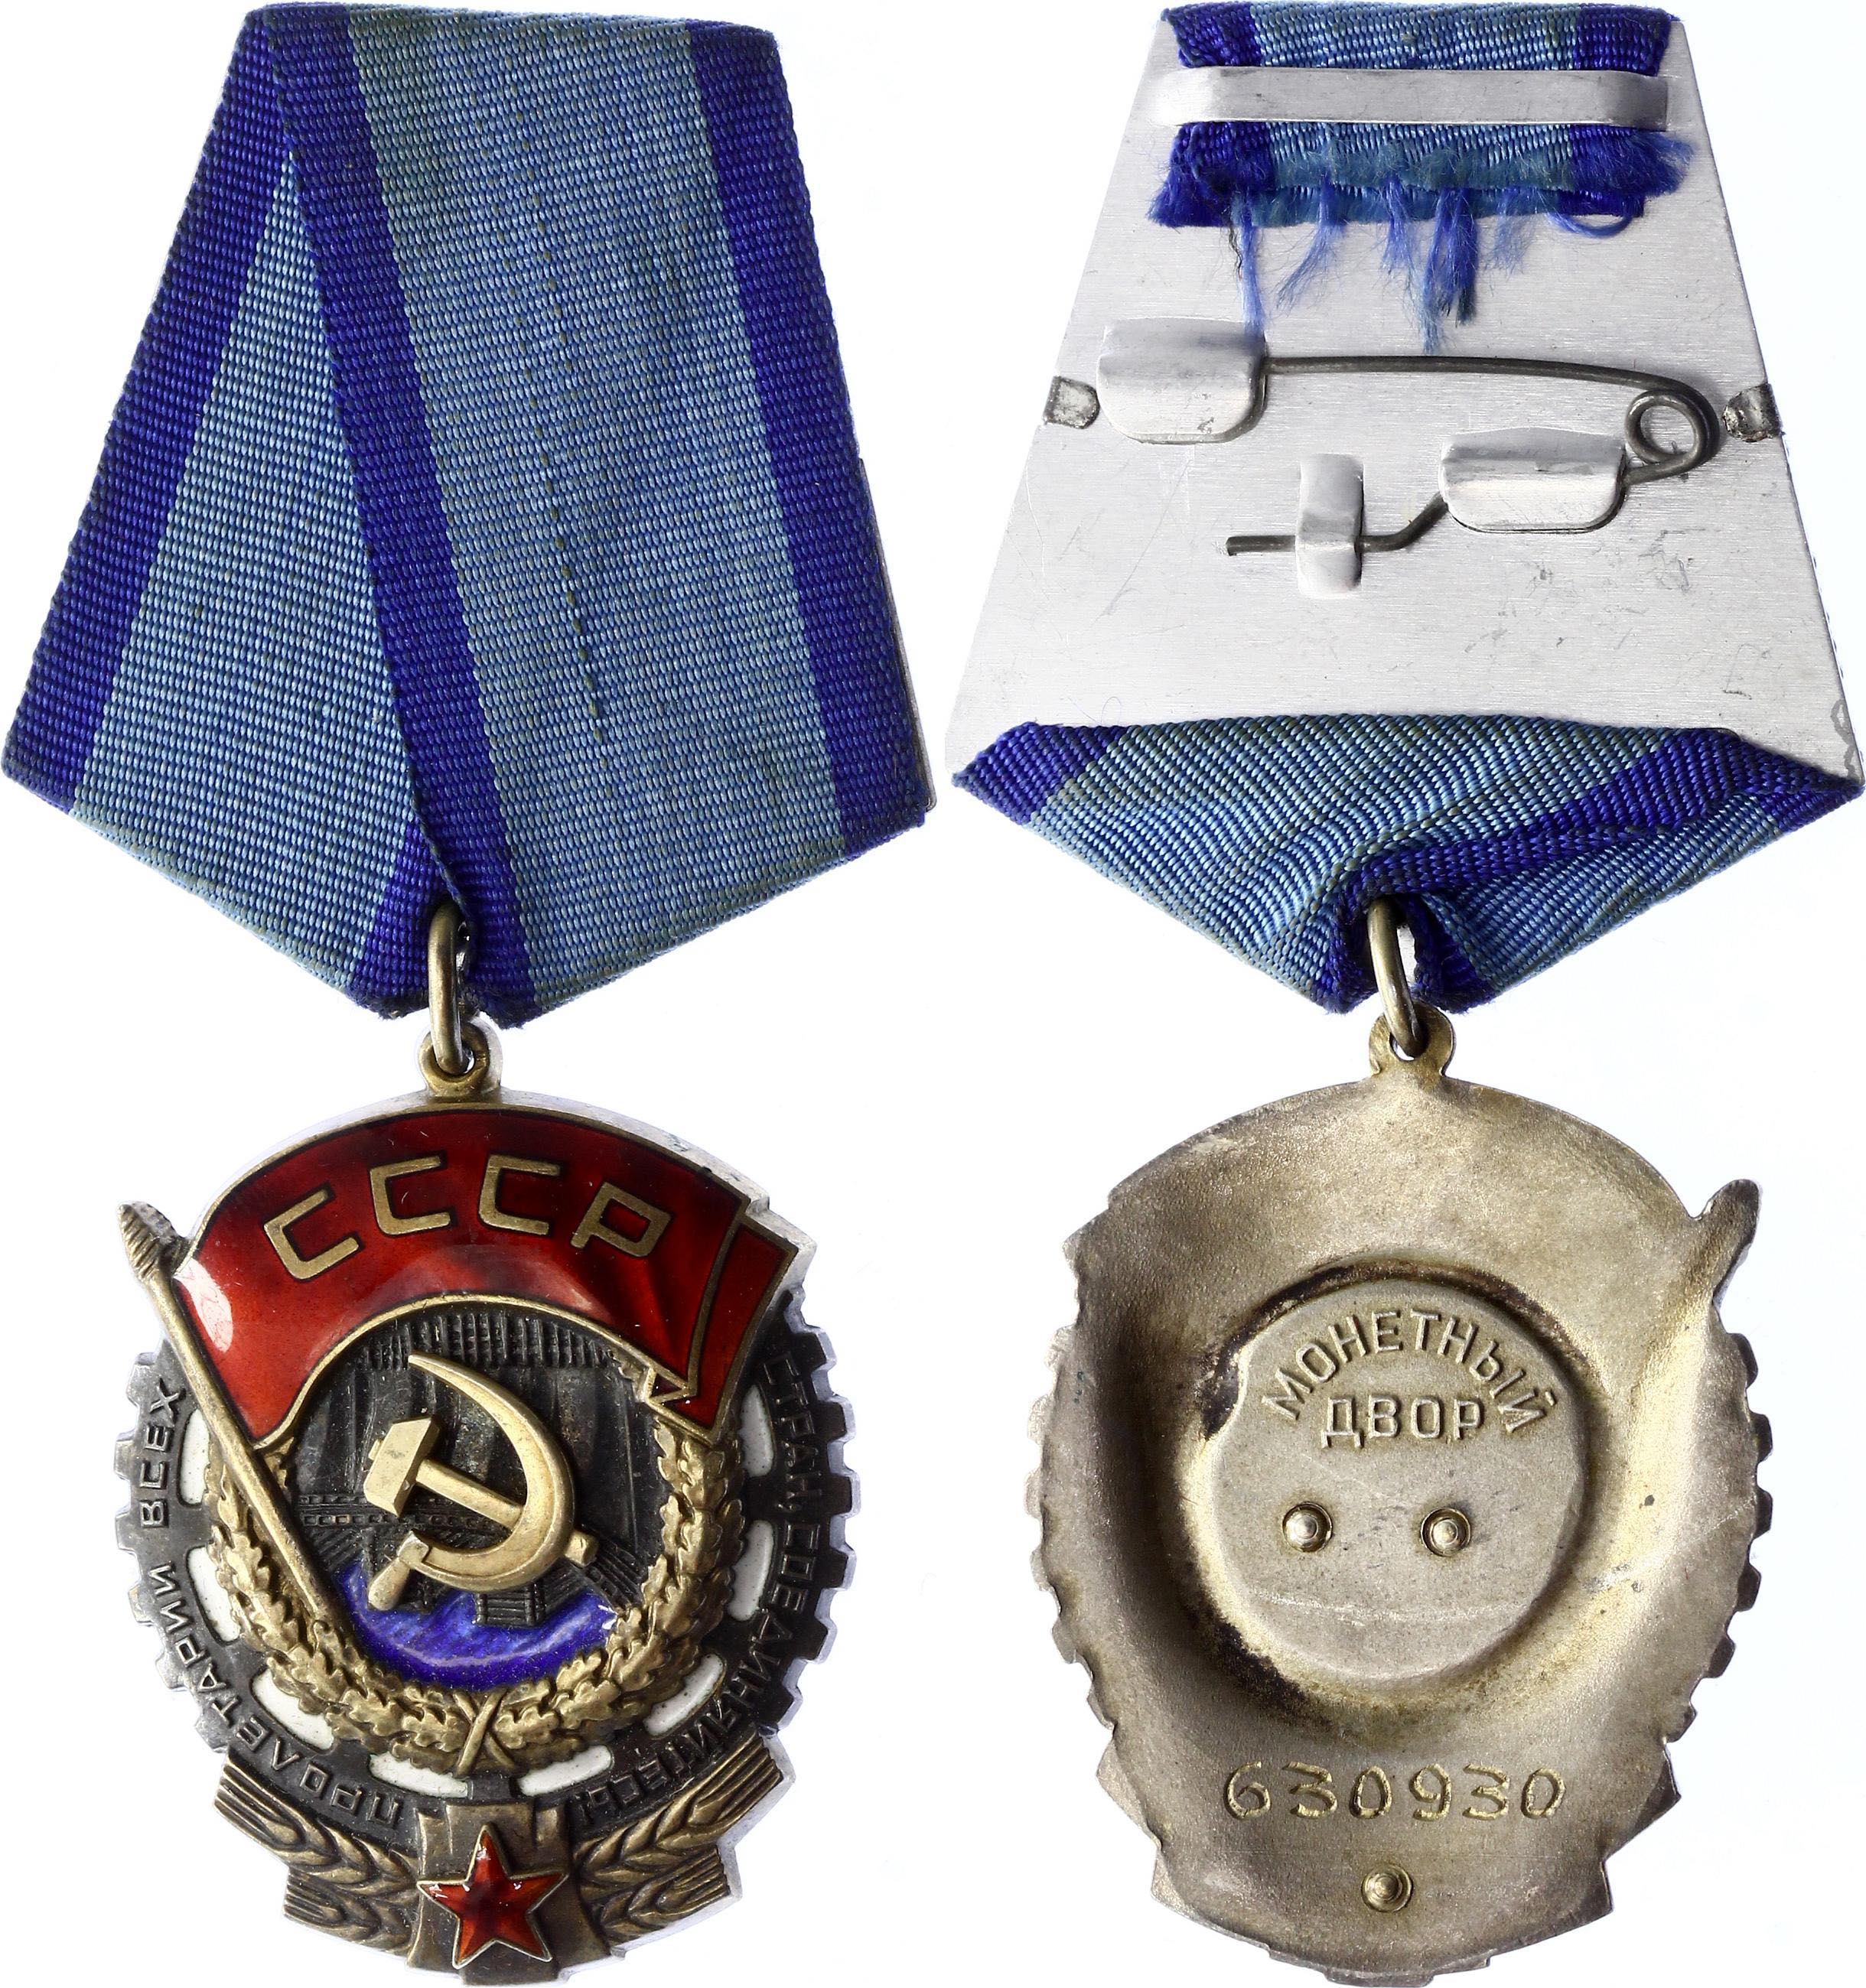 Russia - USSR Order of Labor Red Banner